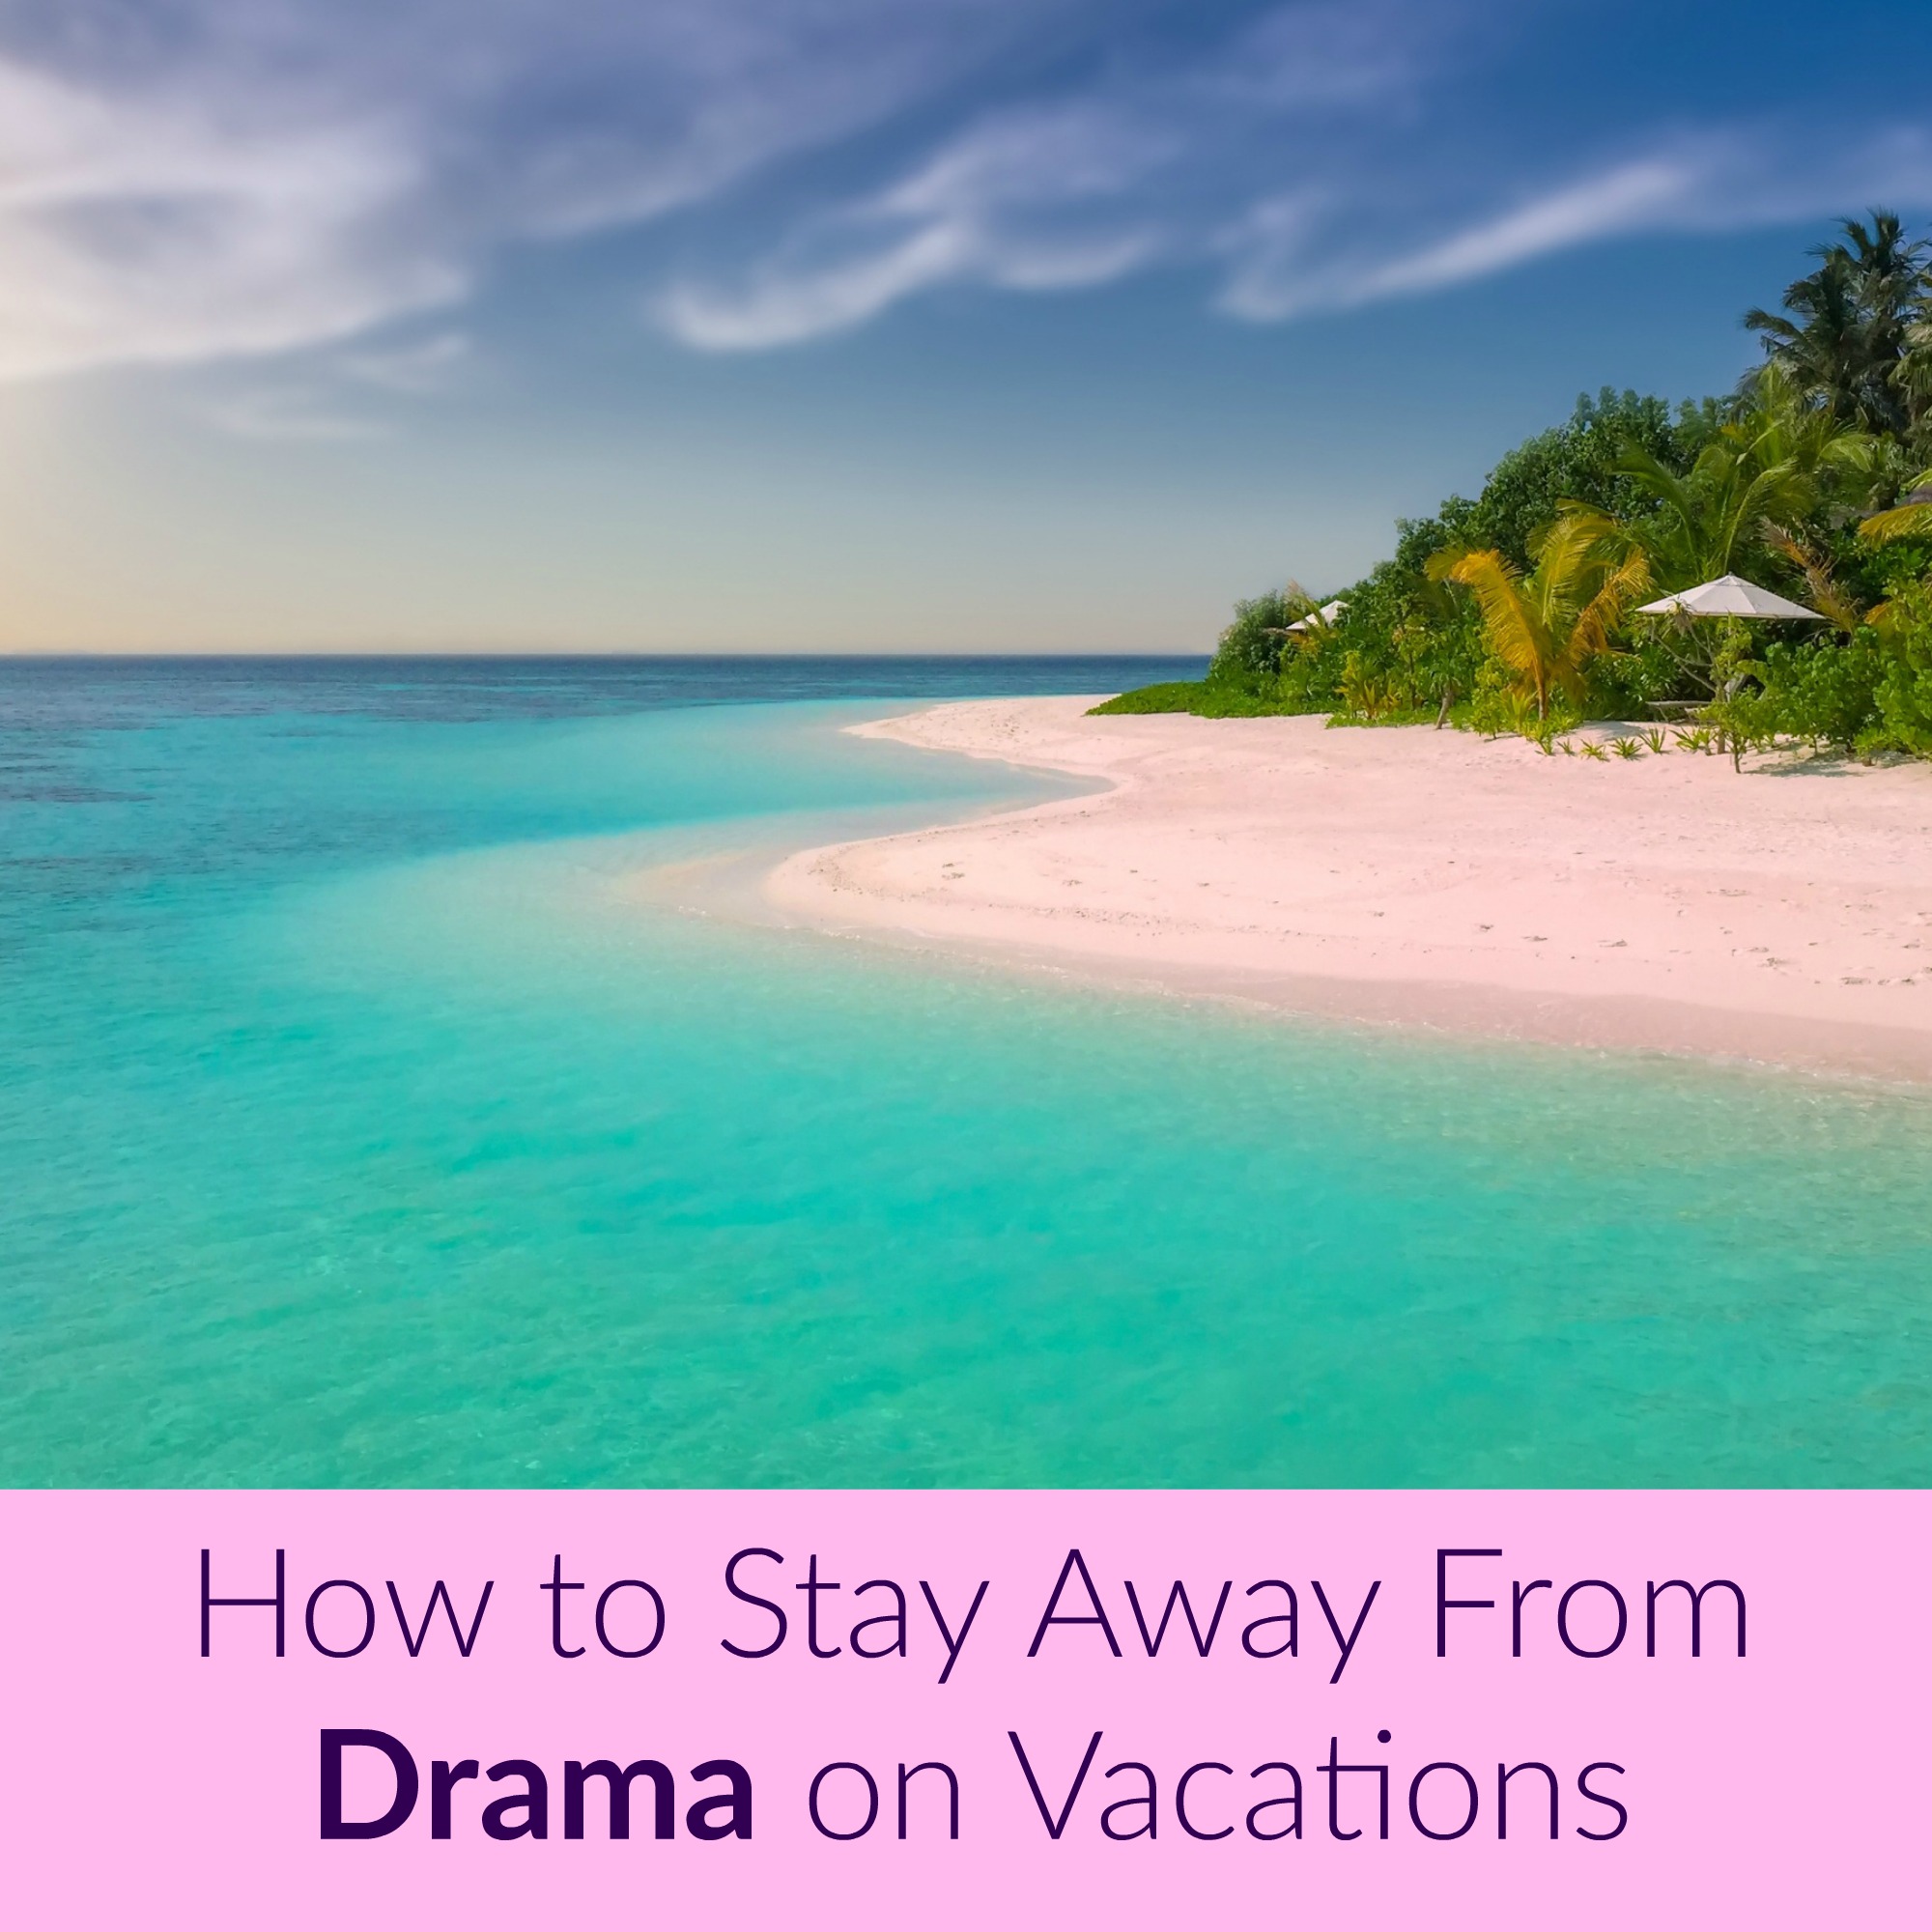 How to Stay Away From Drama on Vacations